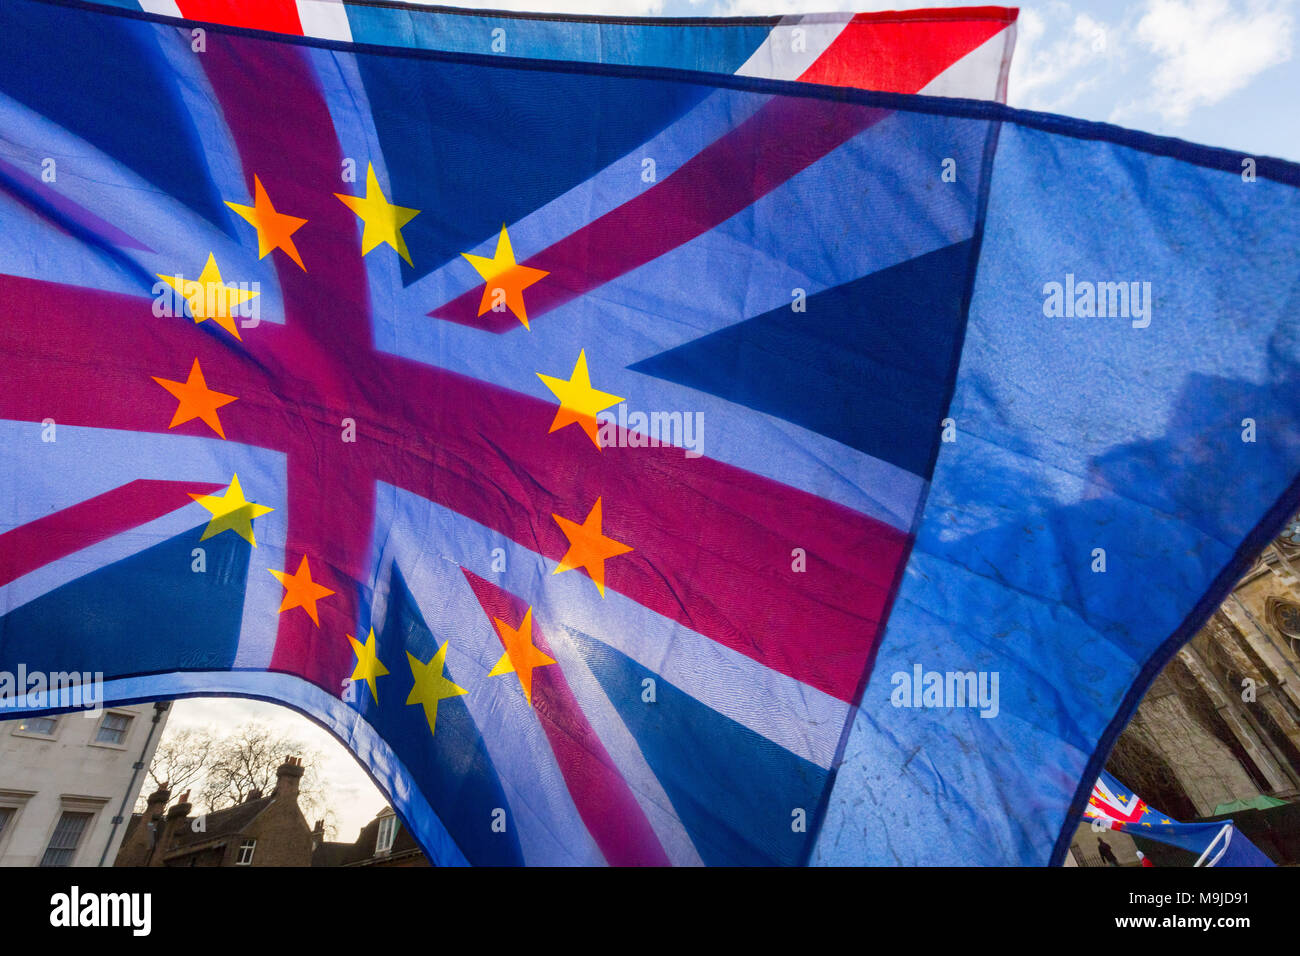 London, UK. 26th March, 2018. Pro-remain and EU supporters continue their weekly campaign vigils opposite the Houses of Parliament waving numerous British and European flags. Credit: Guy Corbishley/Alamy Live News Stock Photo